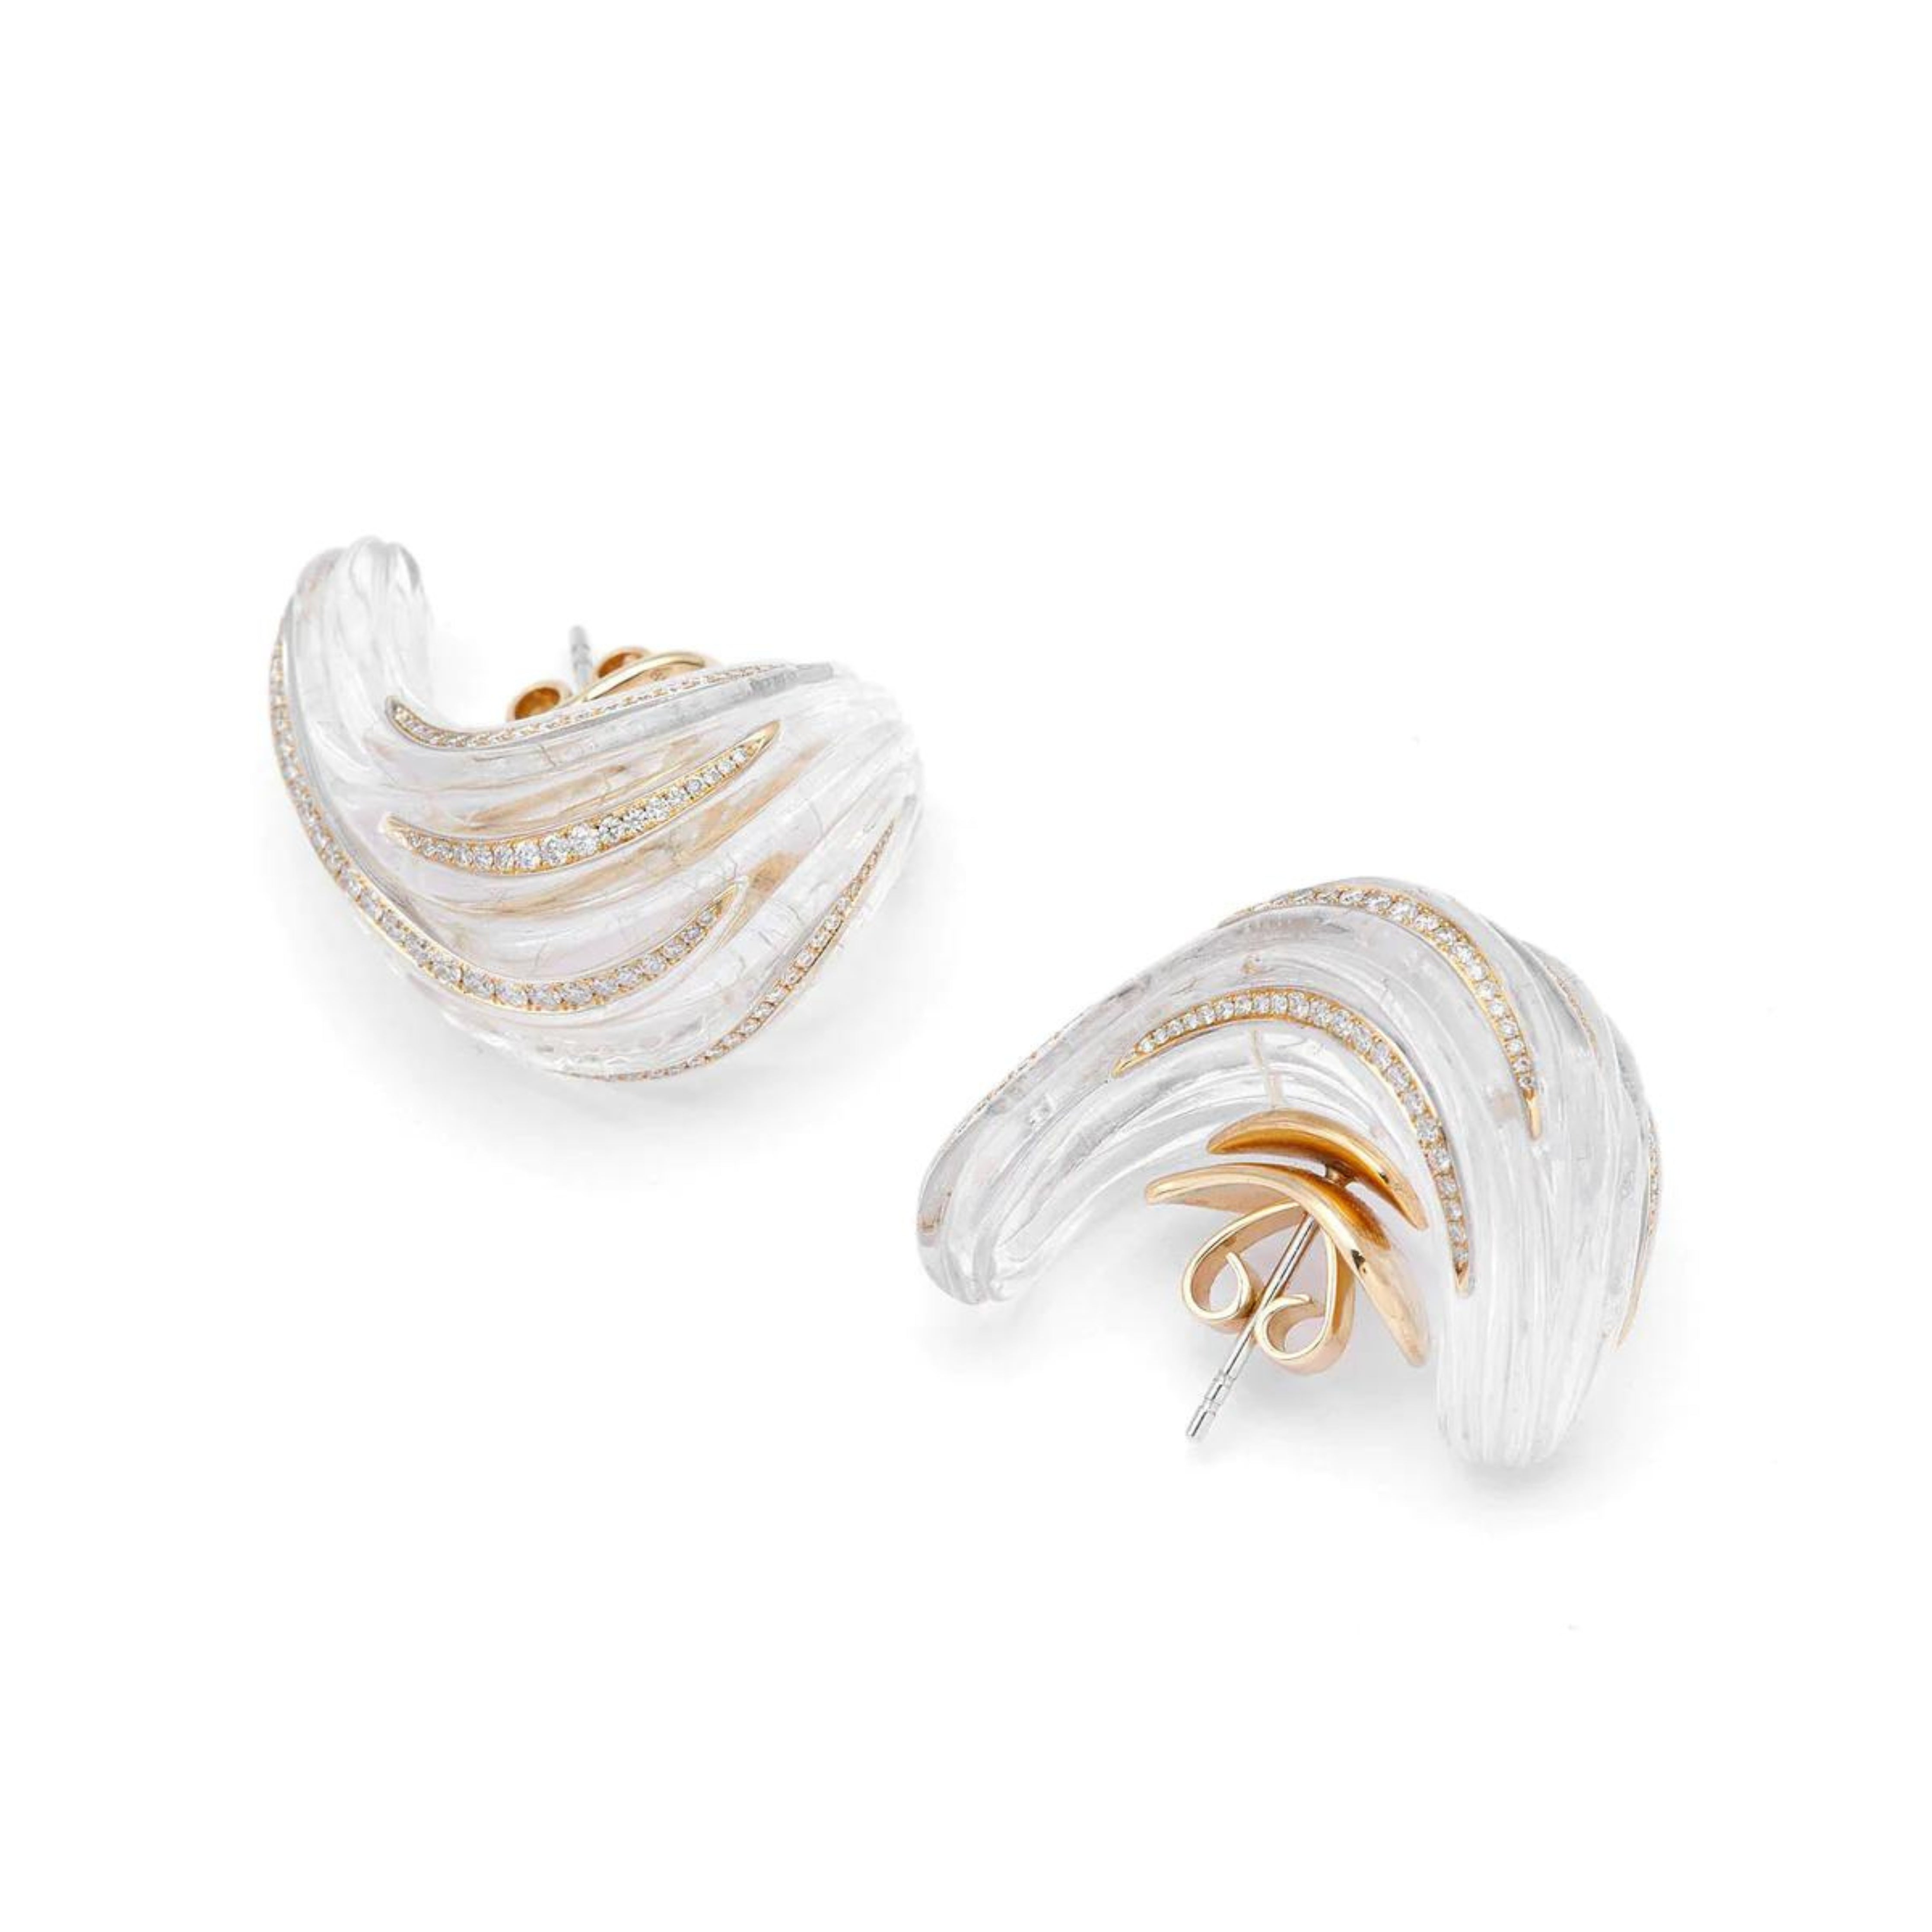 Bibi van der Velden Tidal Wave Earrings crafted with an 18K yellow gold base and accents, white diamonds, and rutile quartz. They are designed to evoke the powerful surge and delicate sparkle of a tidal wave. Front view.